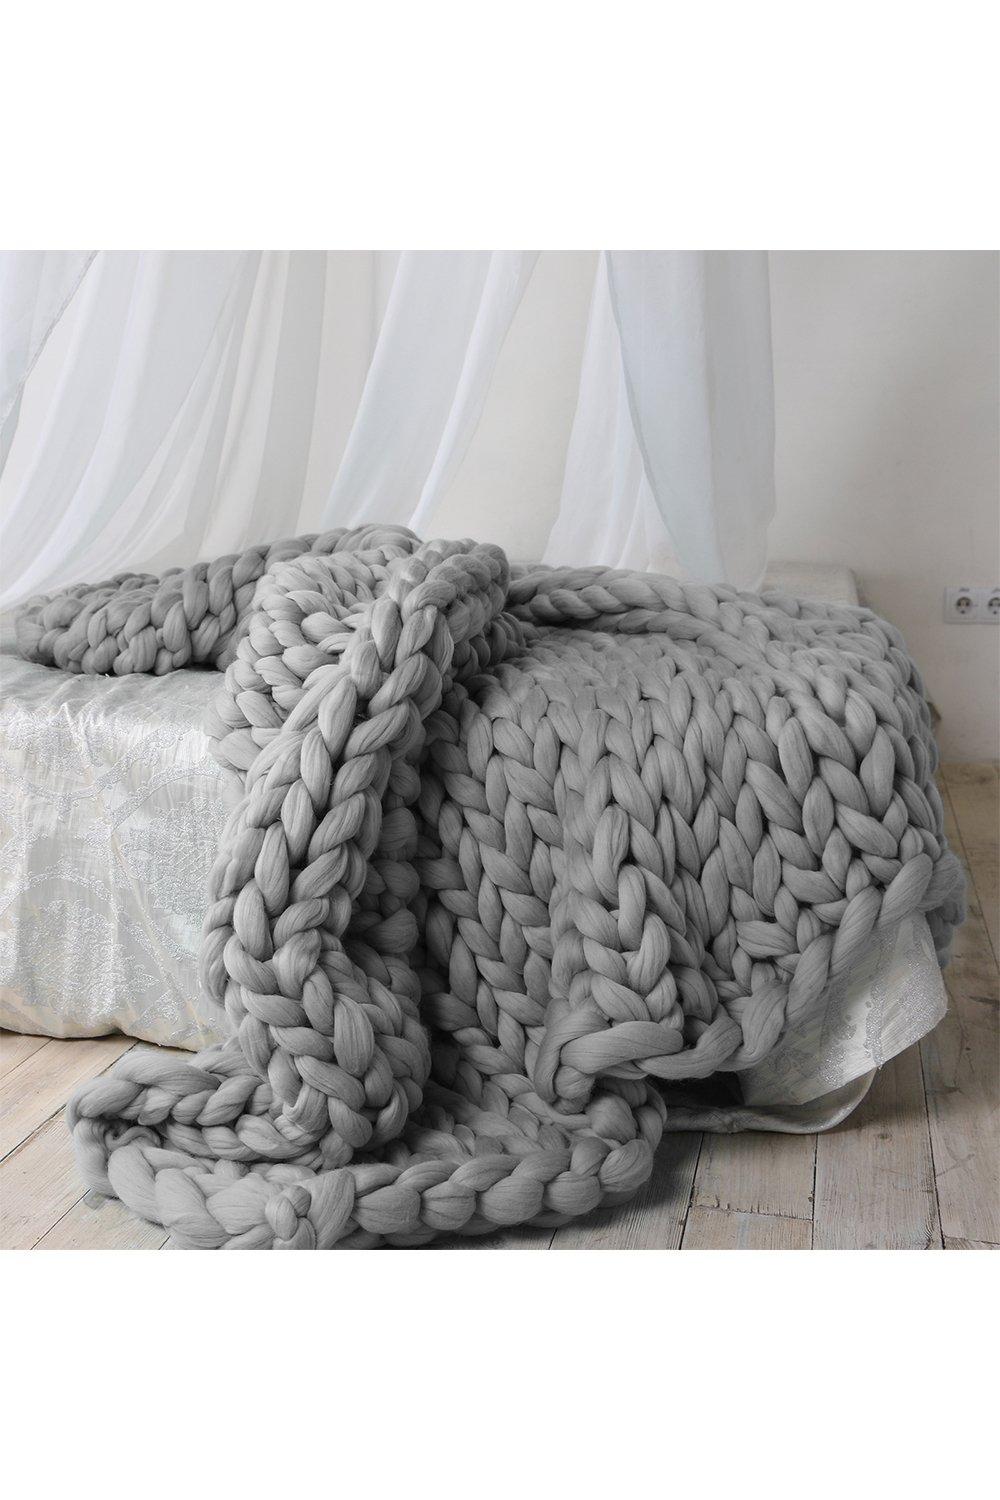 Chunky Knit Blanket Cotton Throw Bulky Soft Braided Hand Knotted Throw for Home Decor 120x150cm